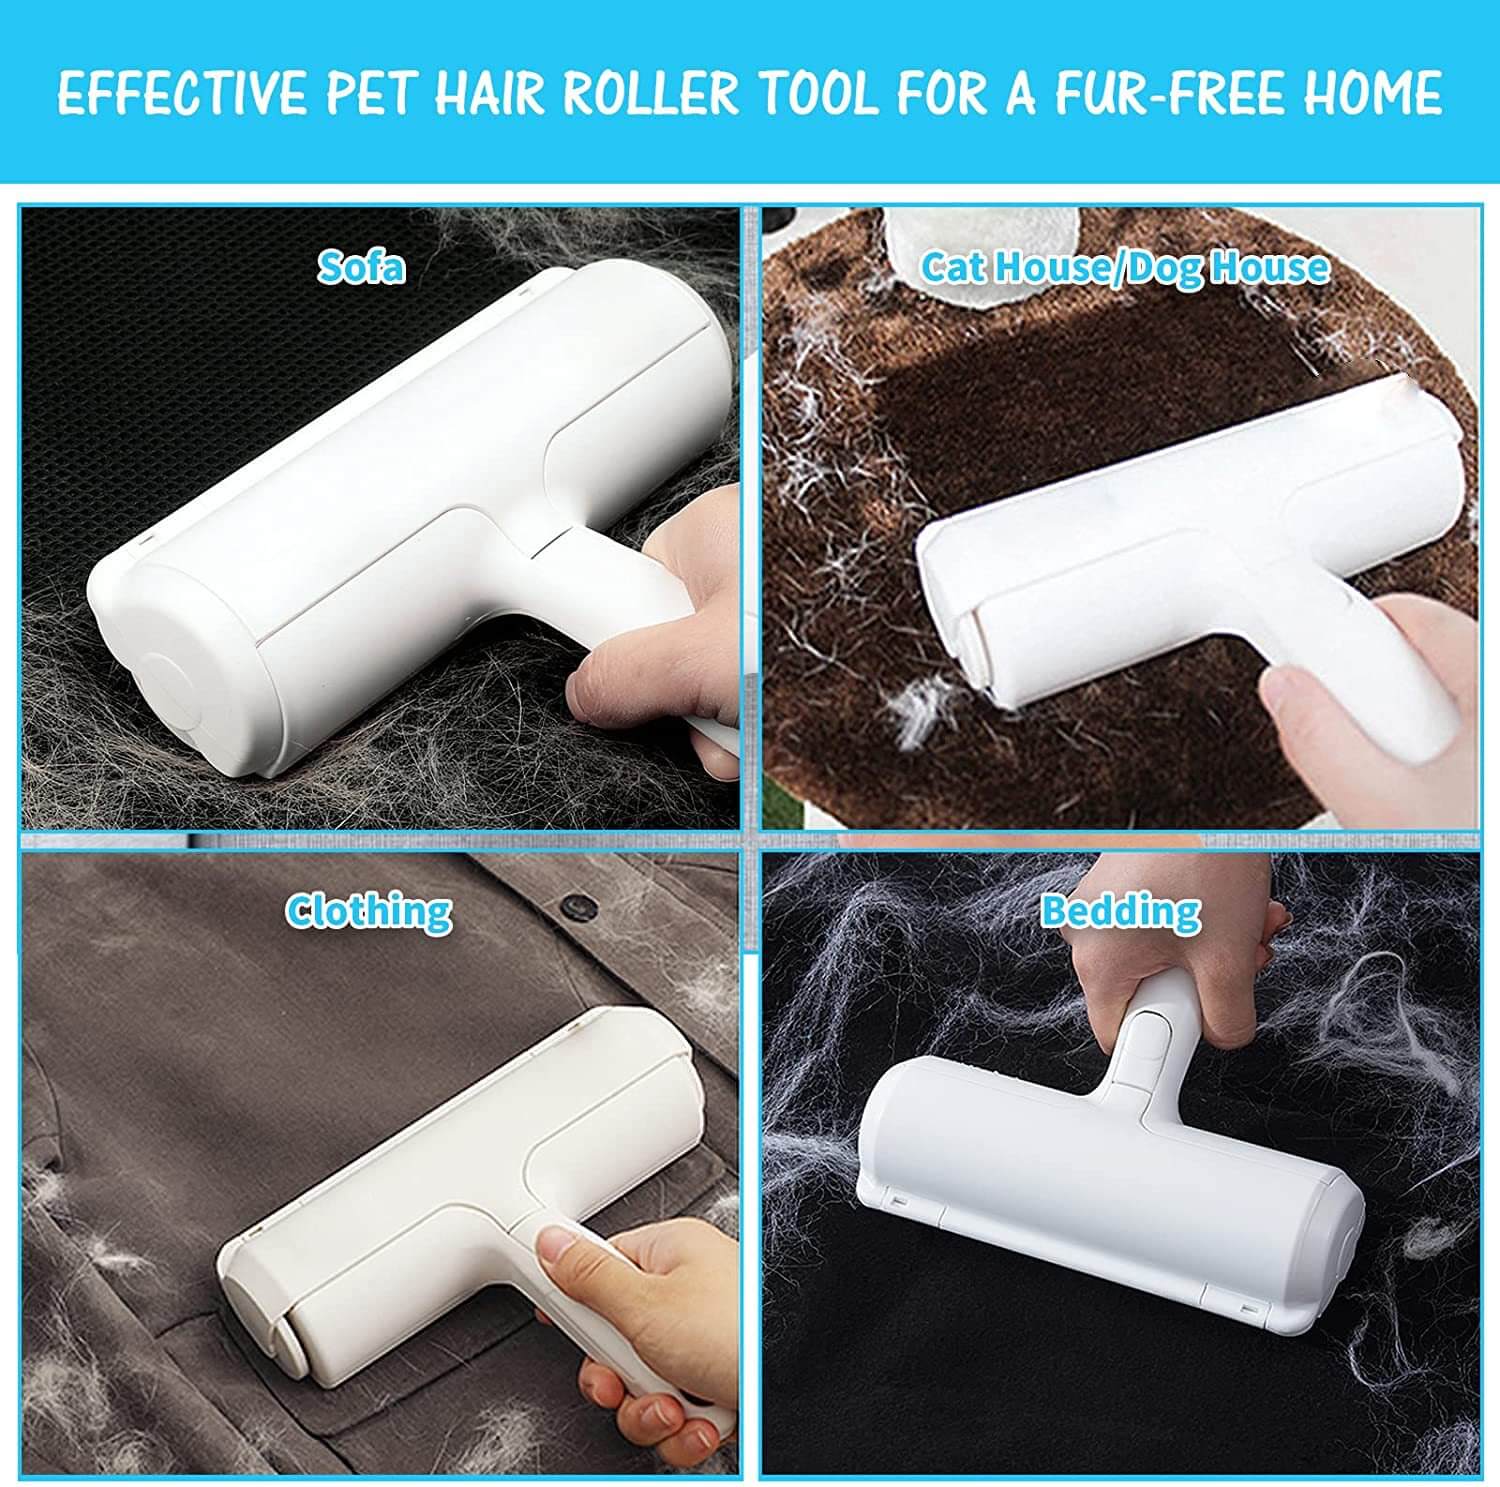 Portable Furniture Hair Remover Roller Pet Hair Remover